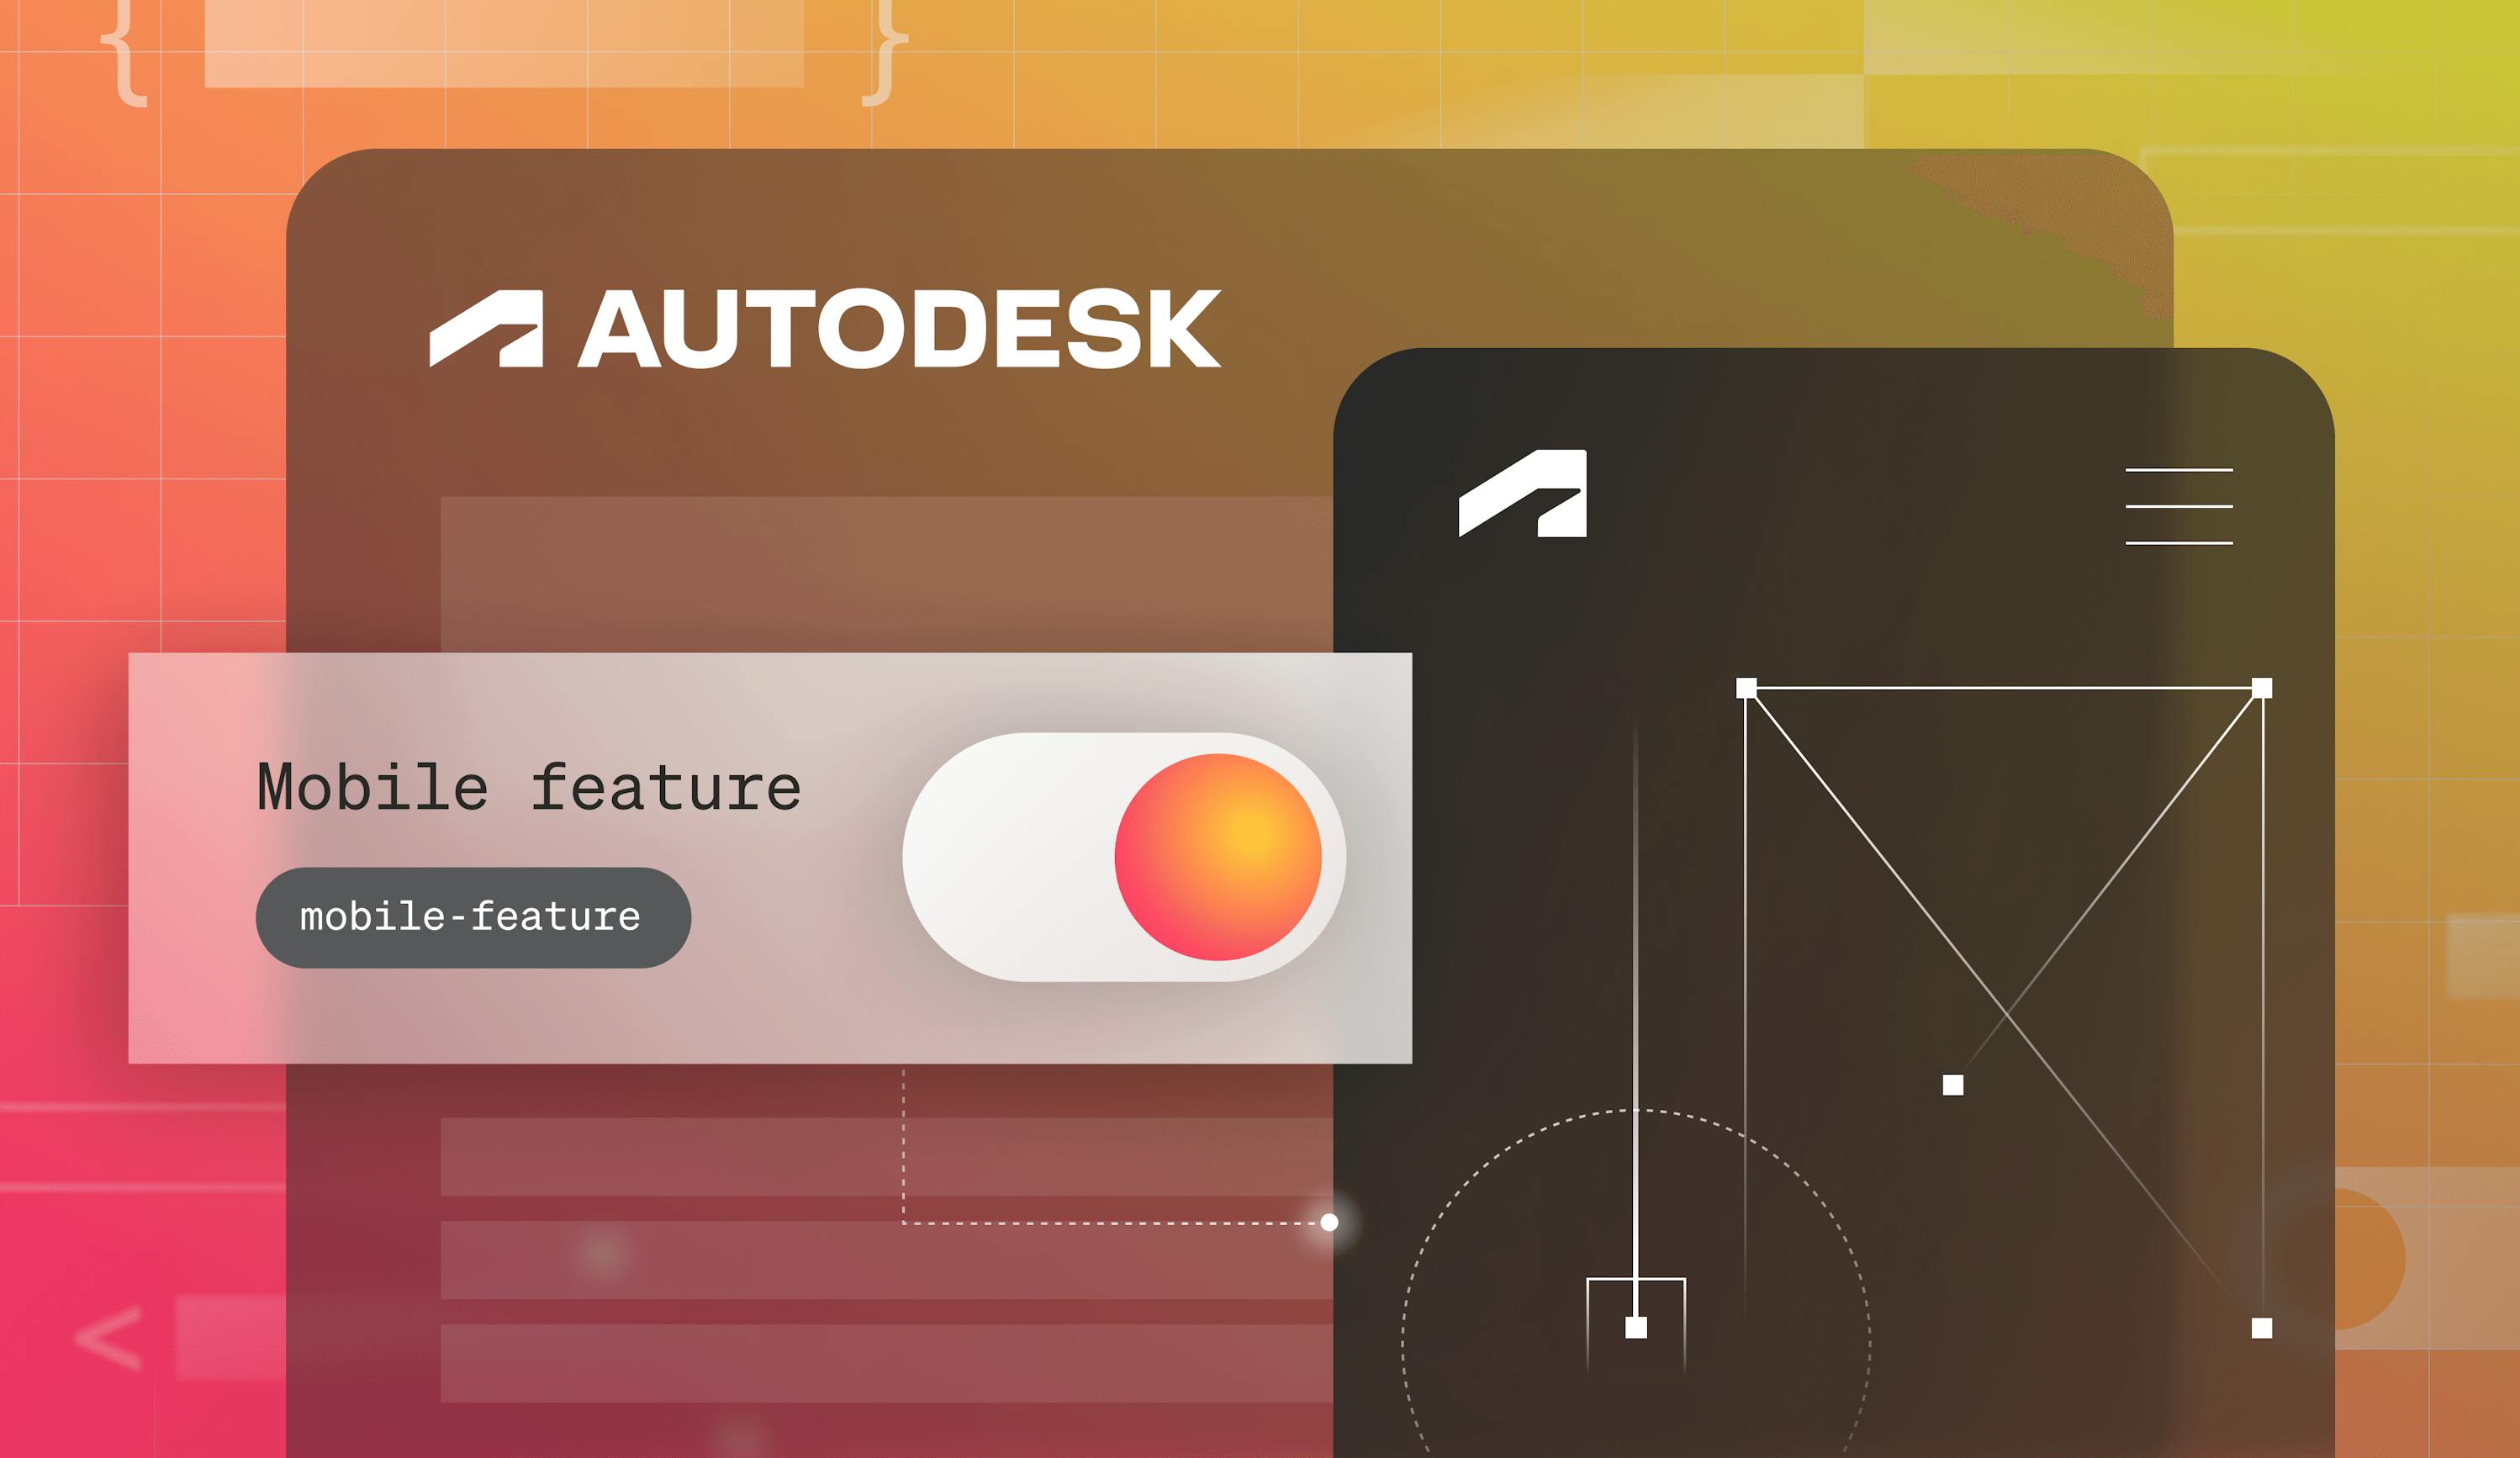 Autodesk Used to Only Release Mobile Features Every 6-8 Weeks. Now, It's Every Week featured image